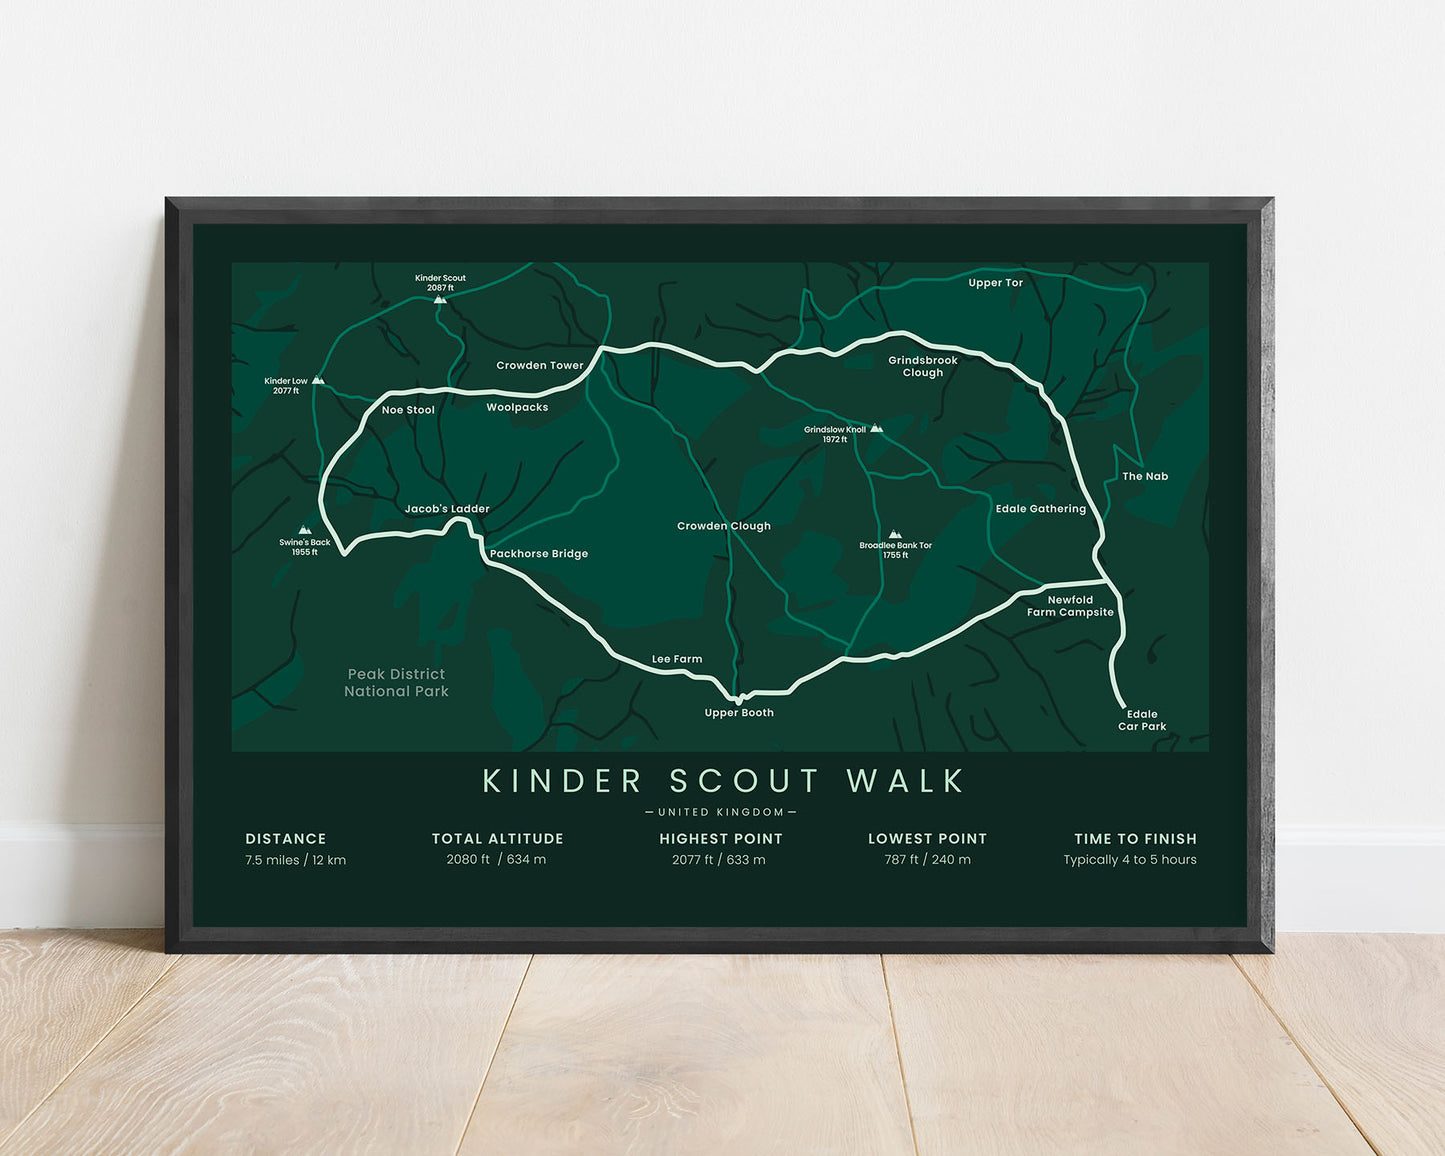 Kinder Scout Walk (Kinder Plateau) path wall art with green background